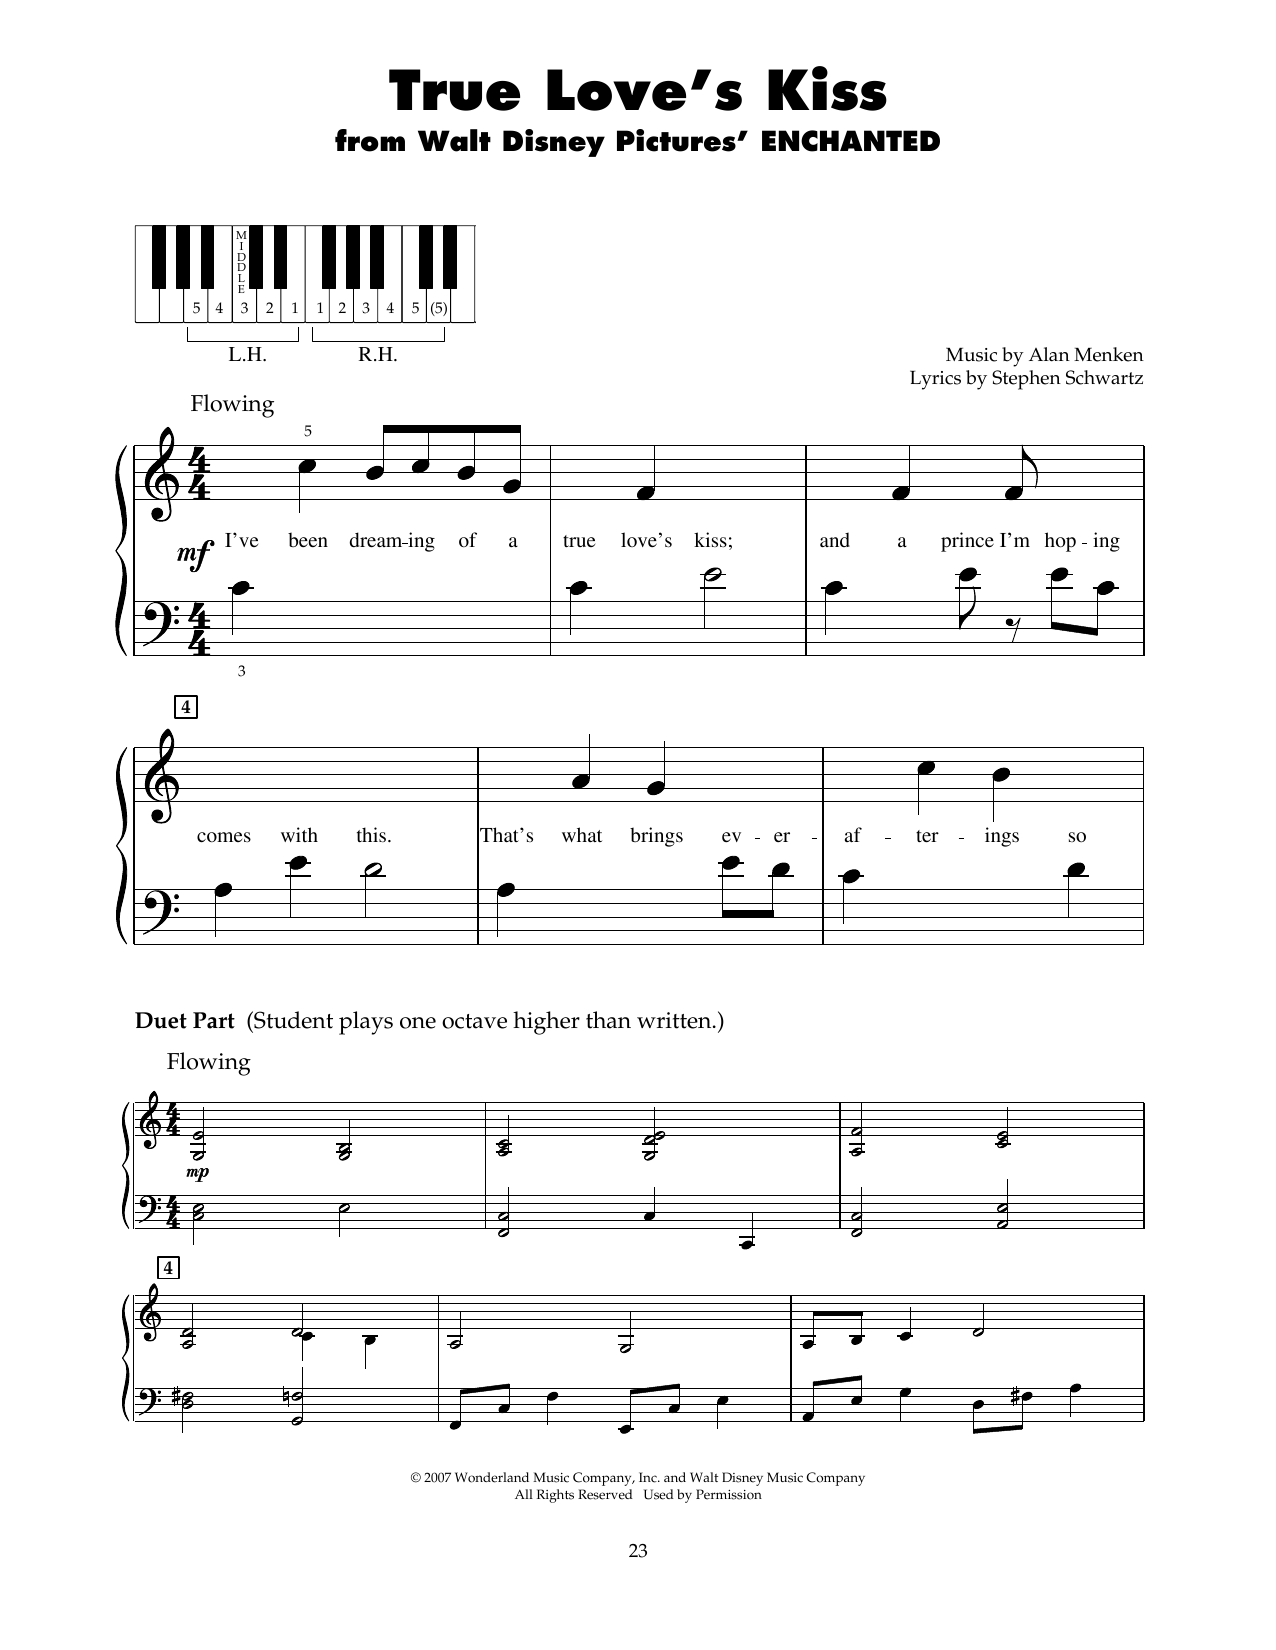 Download Amy Adams True Love's Kiss (from Enchanted) Sheet Music